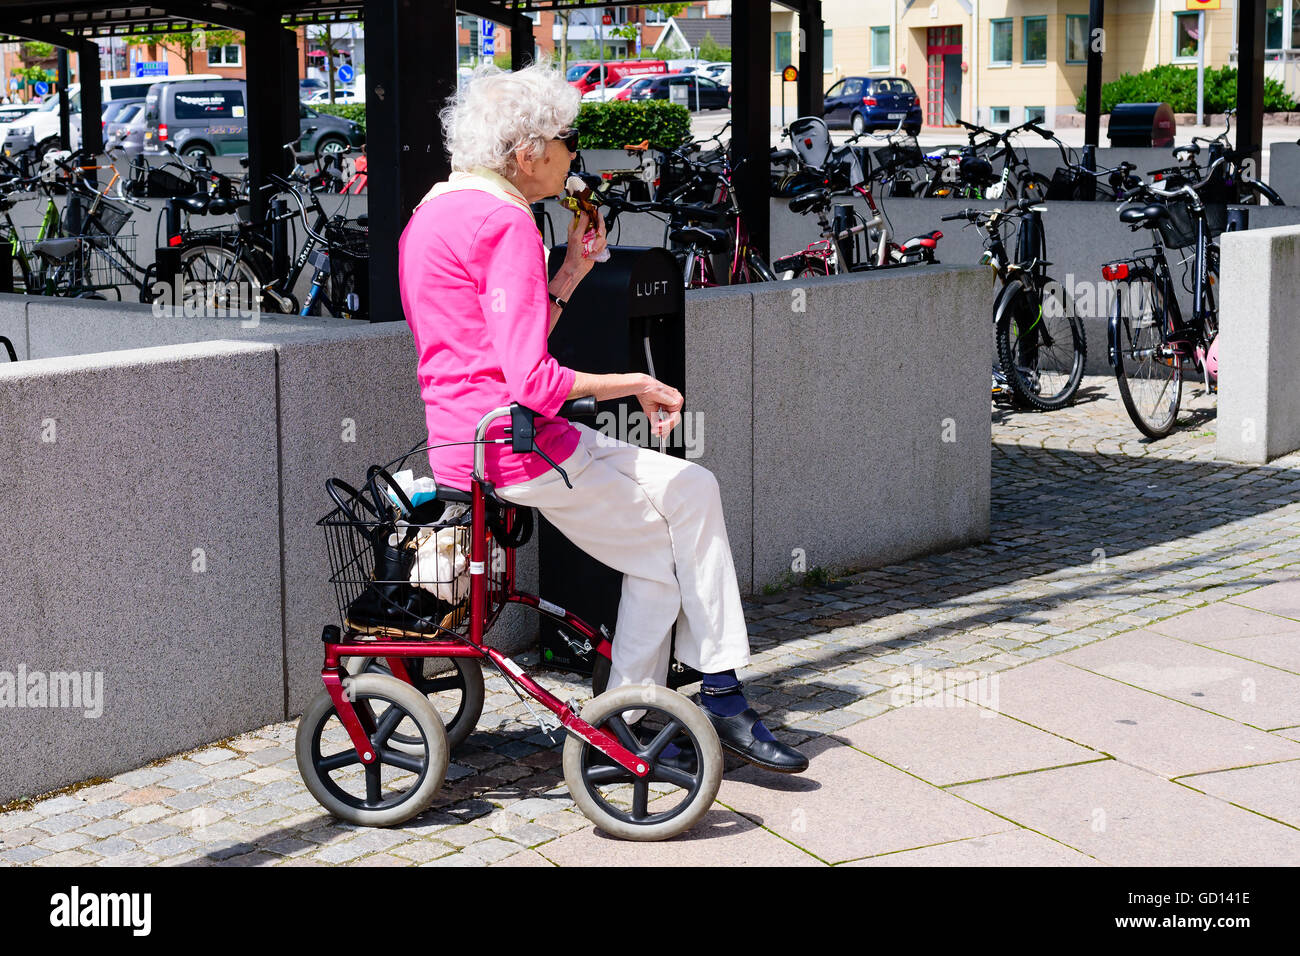 Ronneby, Sweden - July 9, 2016: Senior woman sitting on walker eating ice cream. Parking lot for bikes in the background. Stock Photo